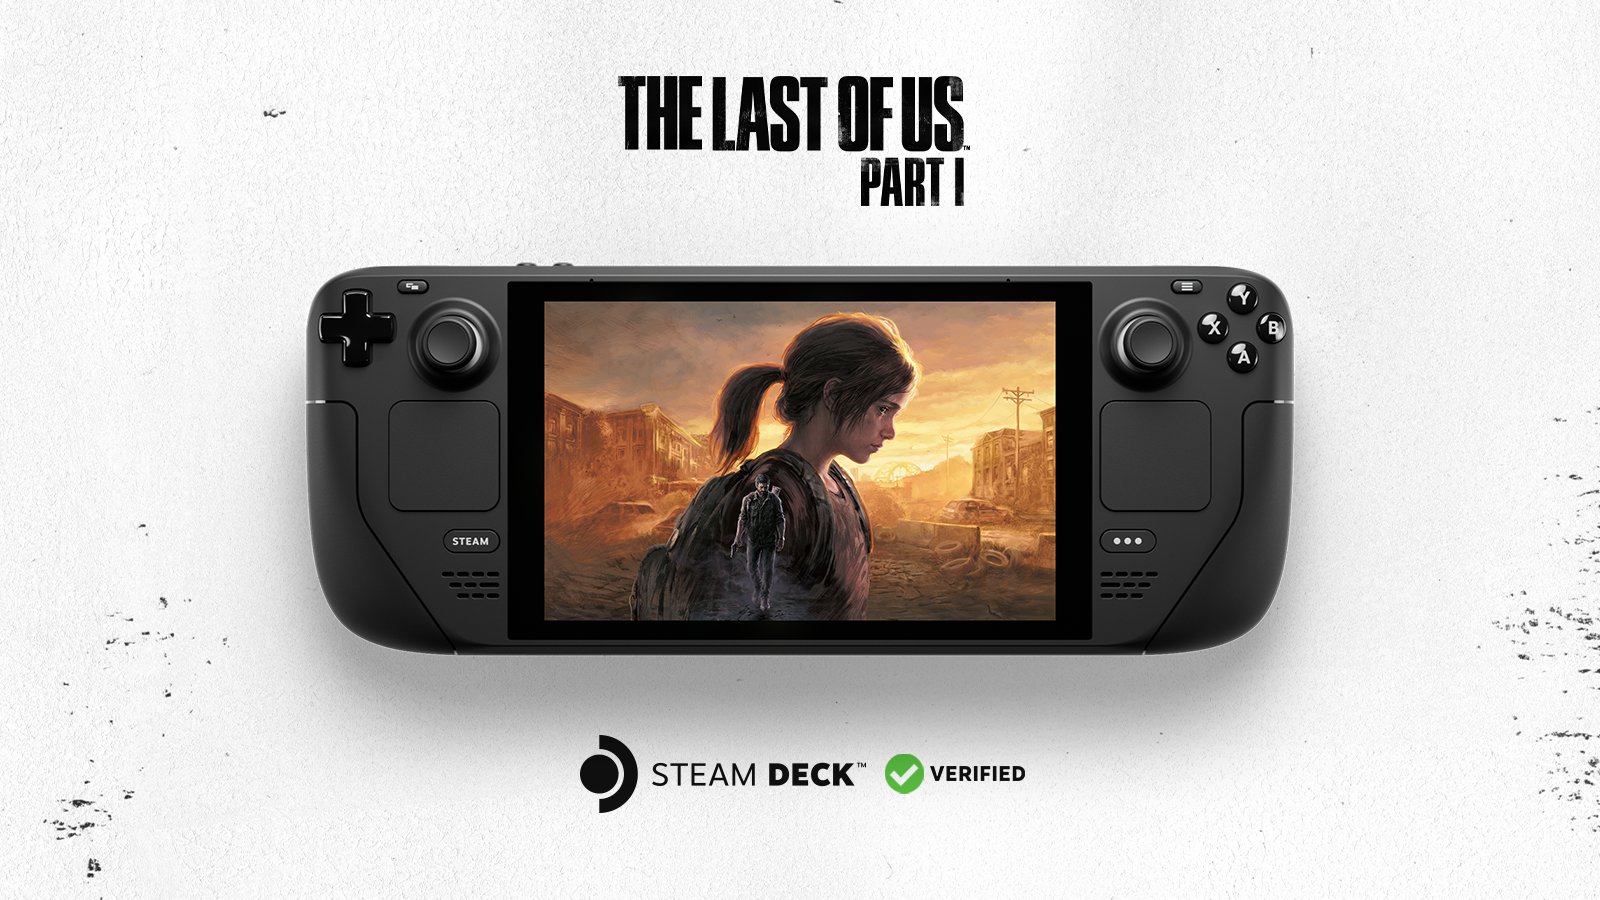 is the last of us coming to steam? : r/thelastofus